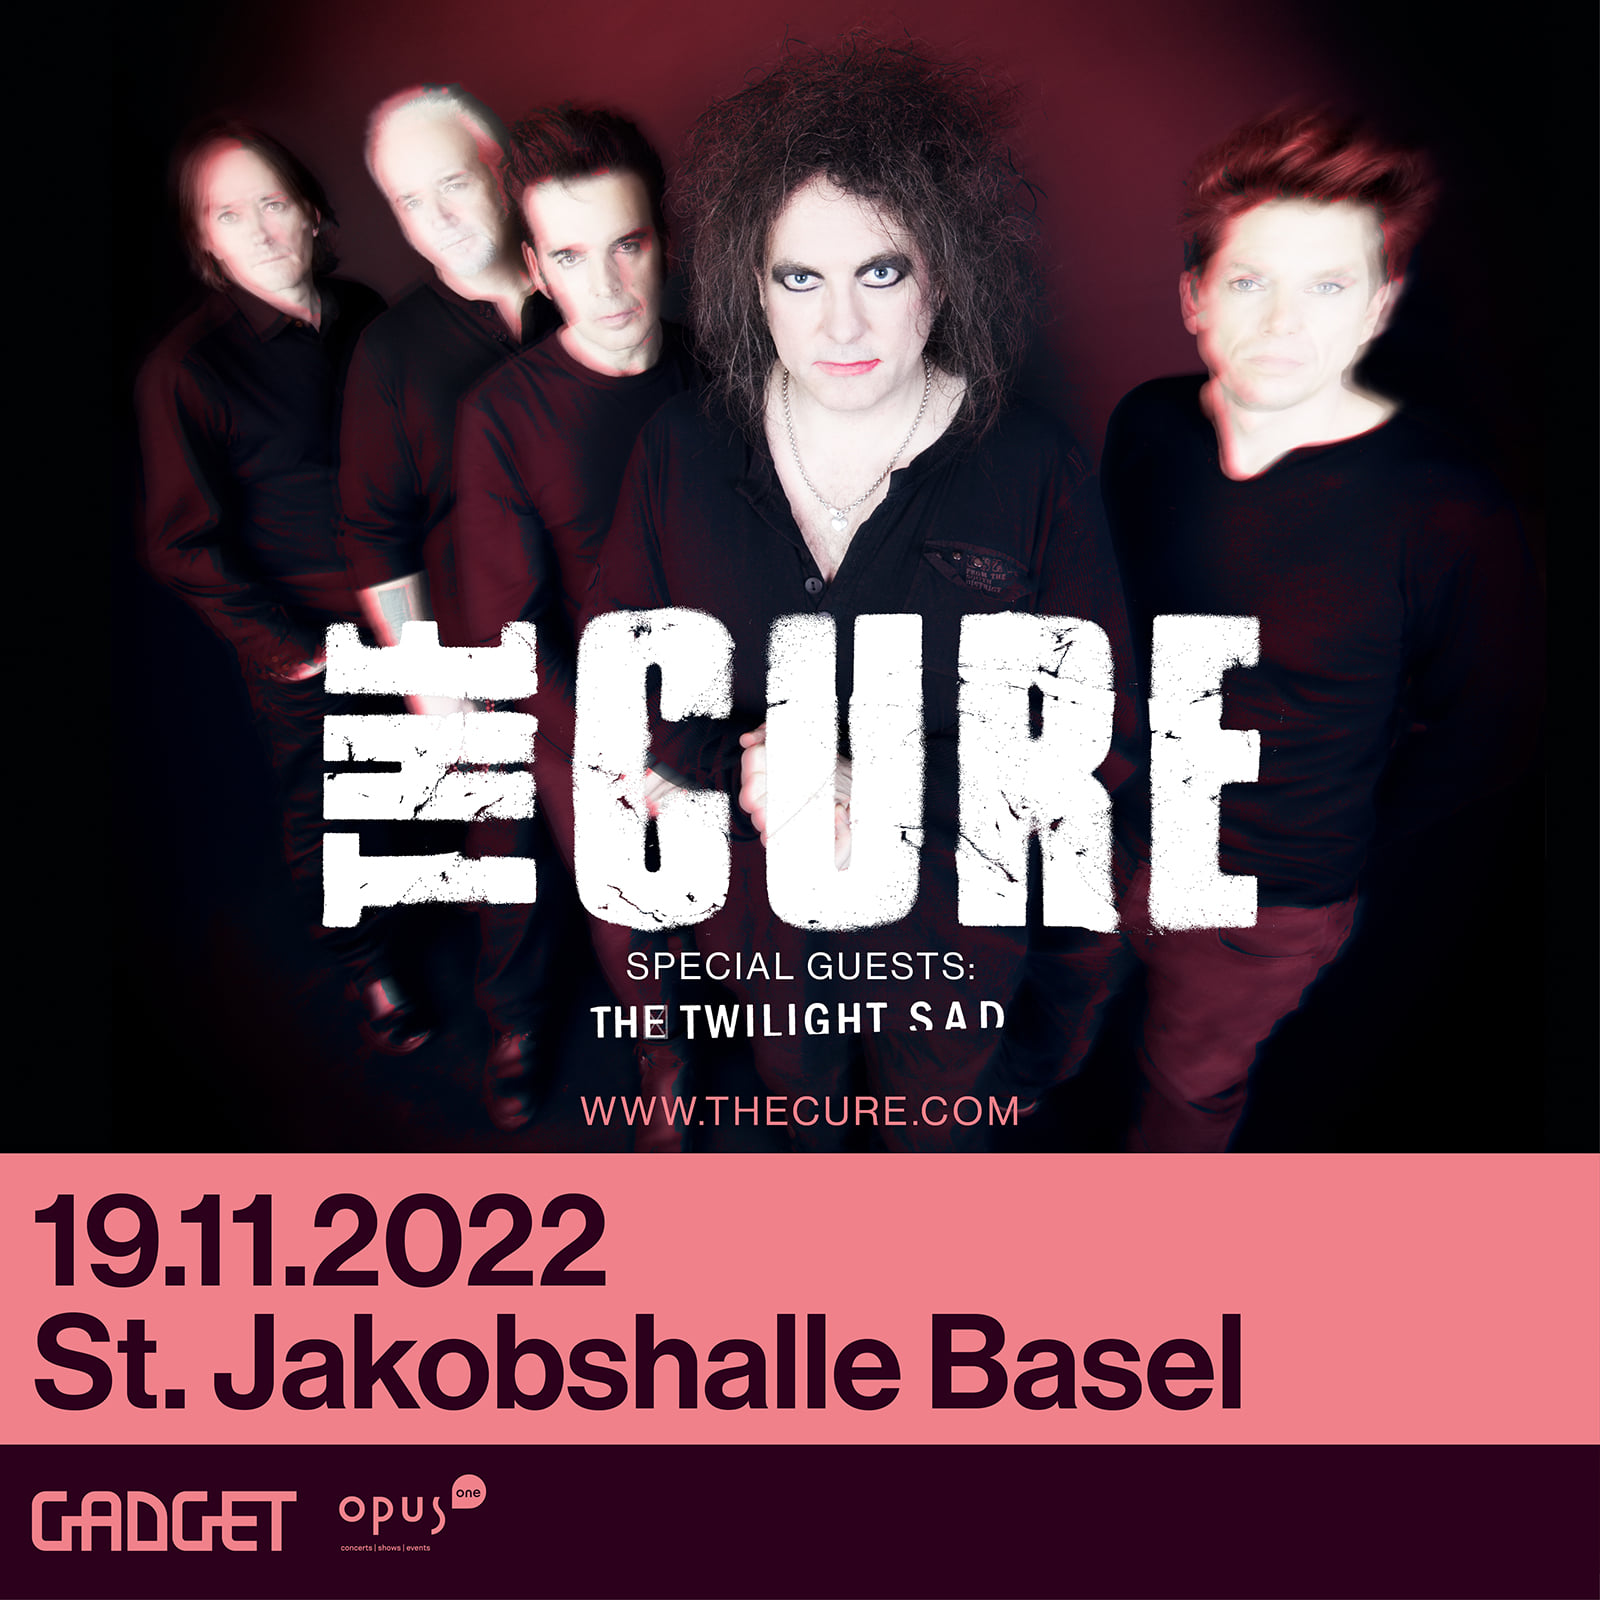 20221119-basel-ch-advert-from-st-jakobshalle-fb